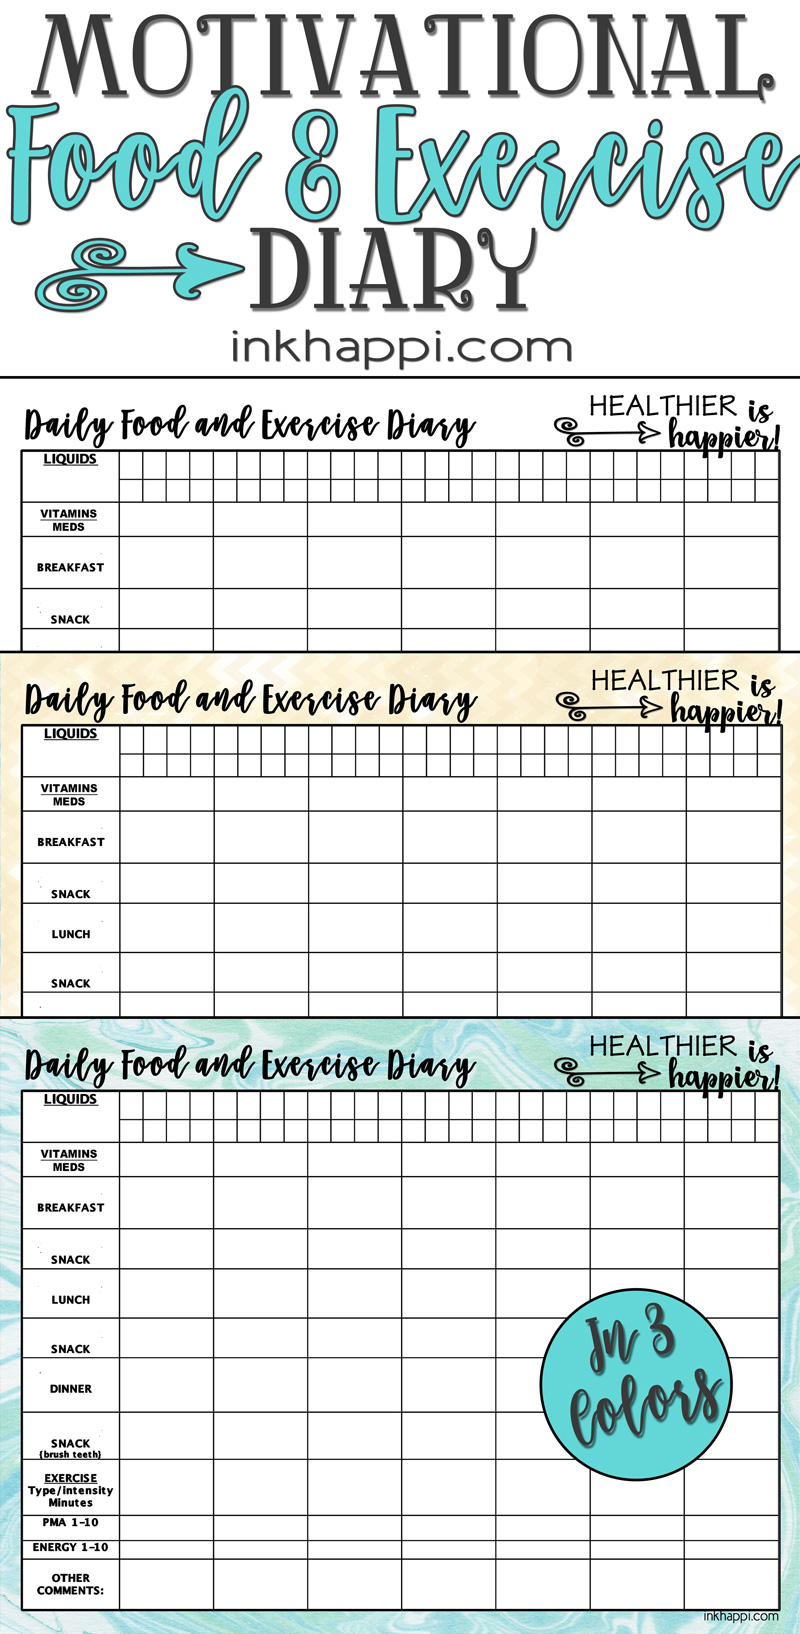 motivational-food-and-exercise-diary-free-printable-inkhappi